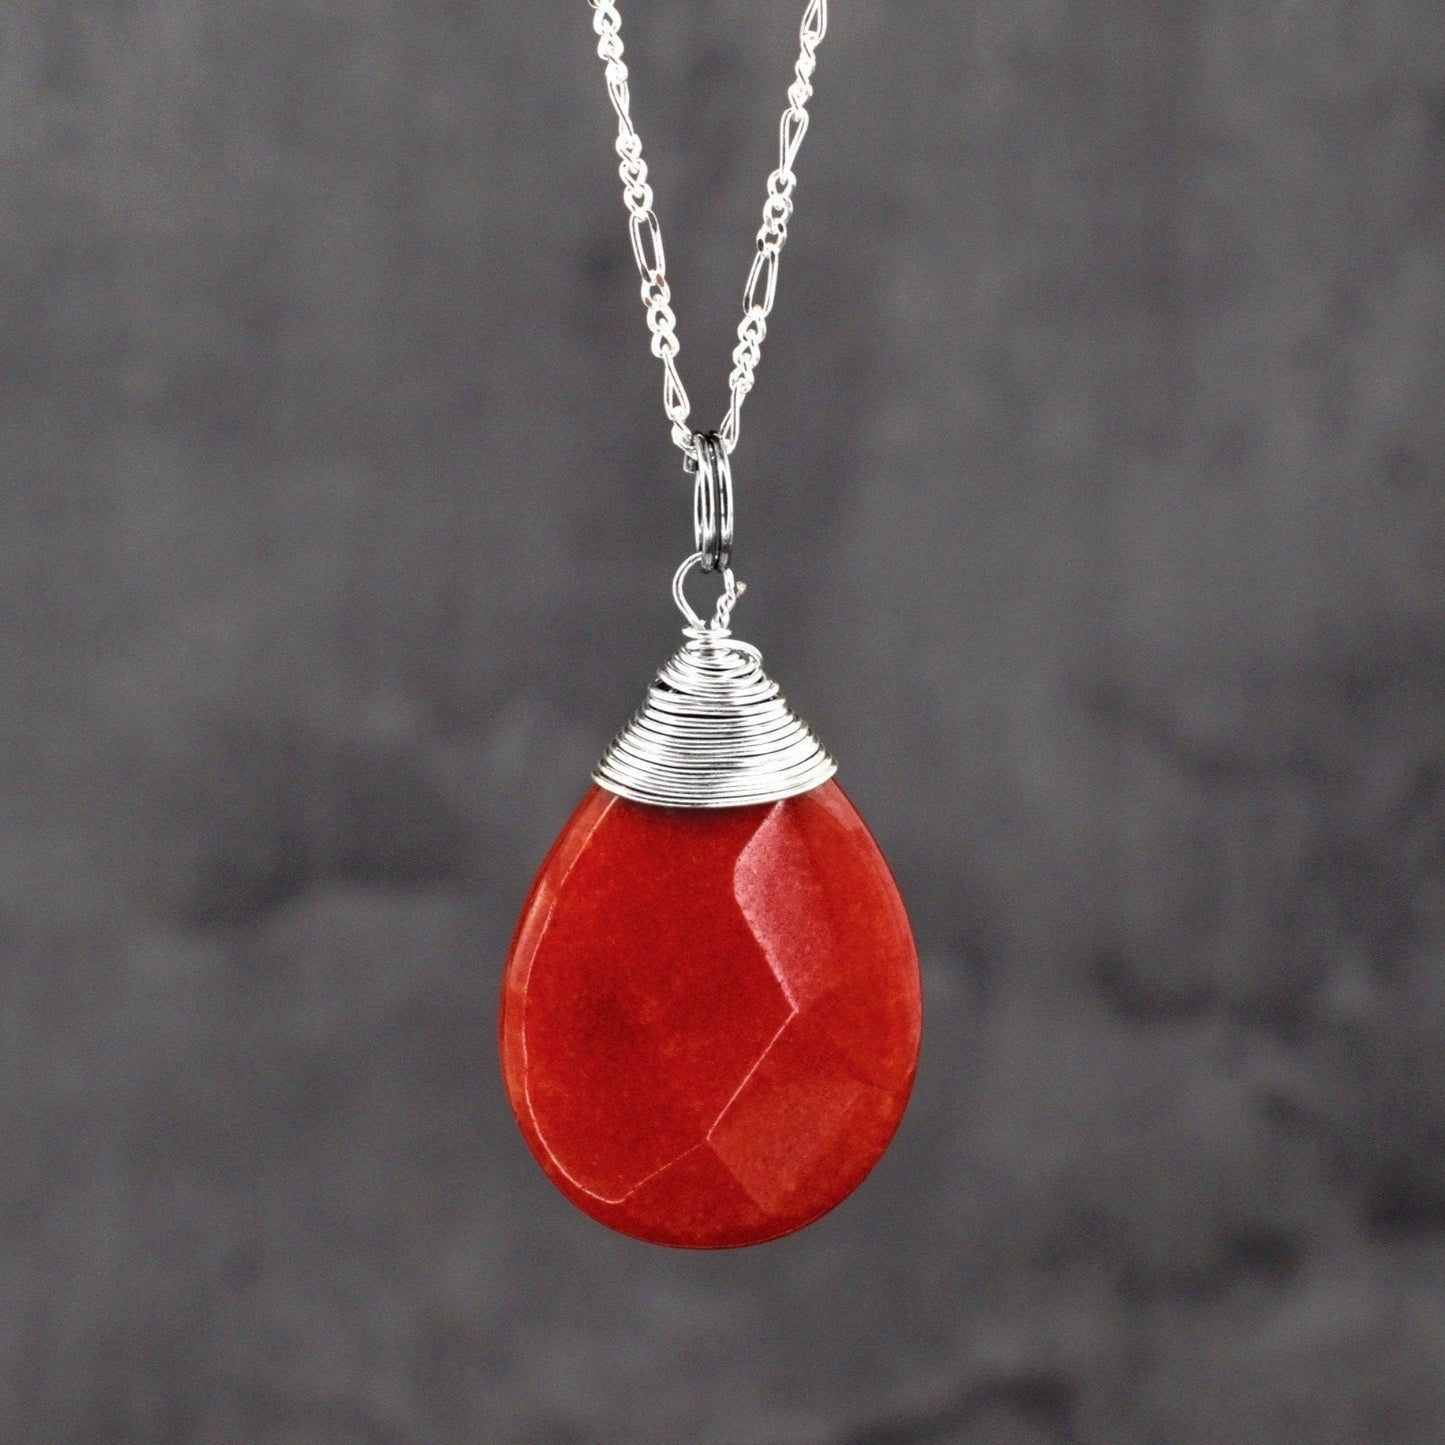 Jade Drop Silver Chain - 925 Sterling Pomegranate Crystal Red Gem Necklace - K925-42